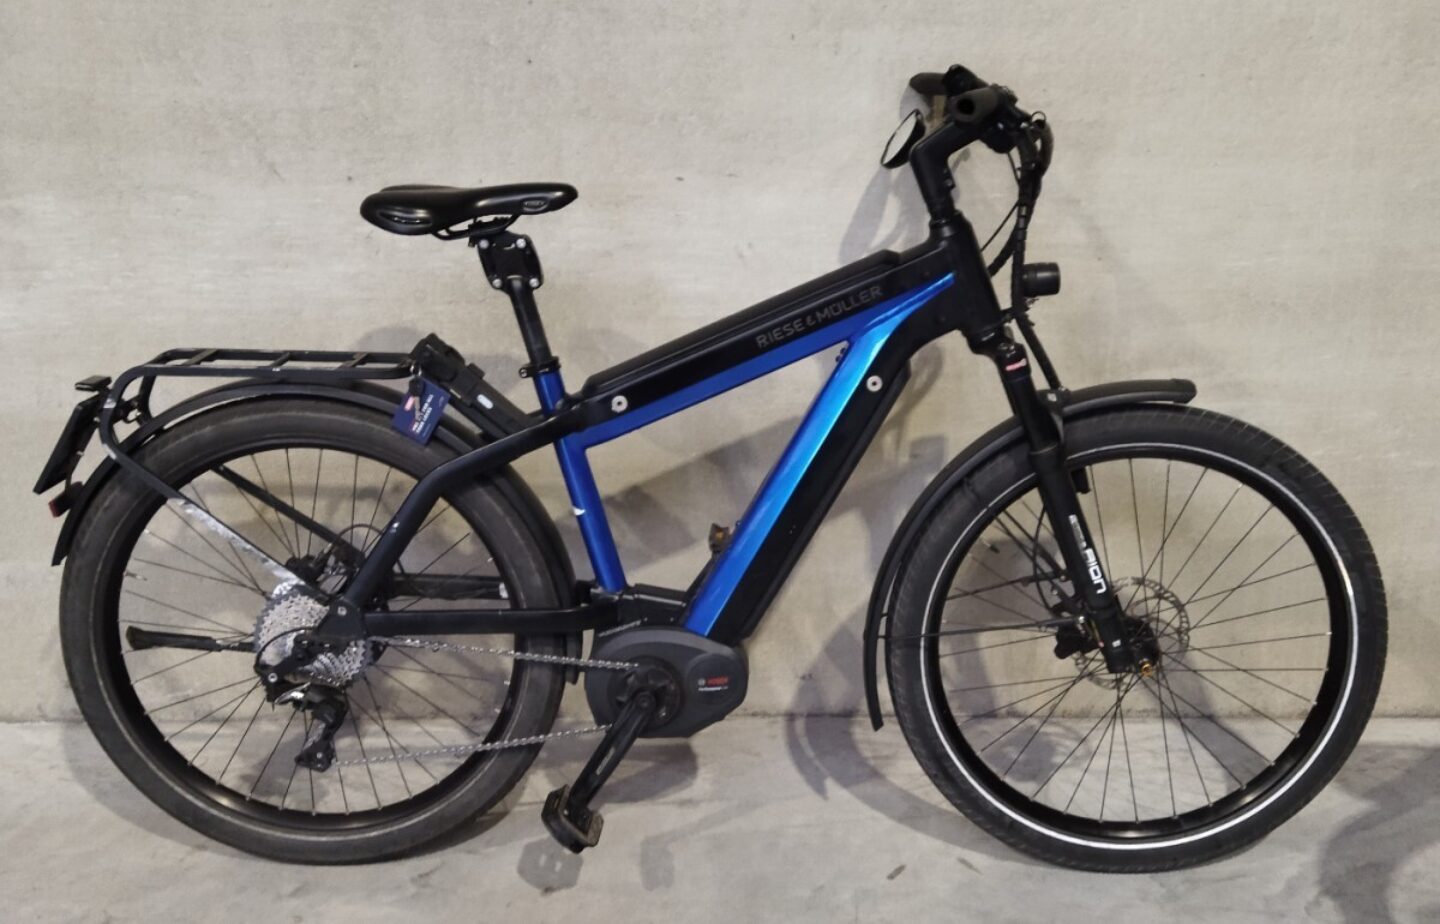 Riese & Müller Supercharger GT touring HS 1000Wh (TWEEDEHANDS) 2019, Electric Blue Metallic